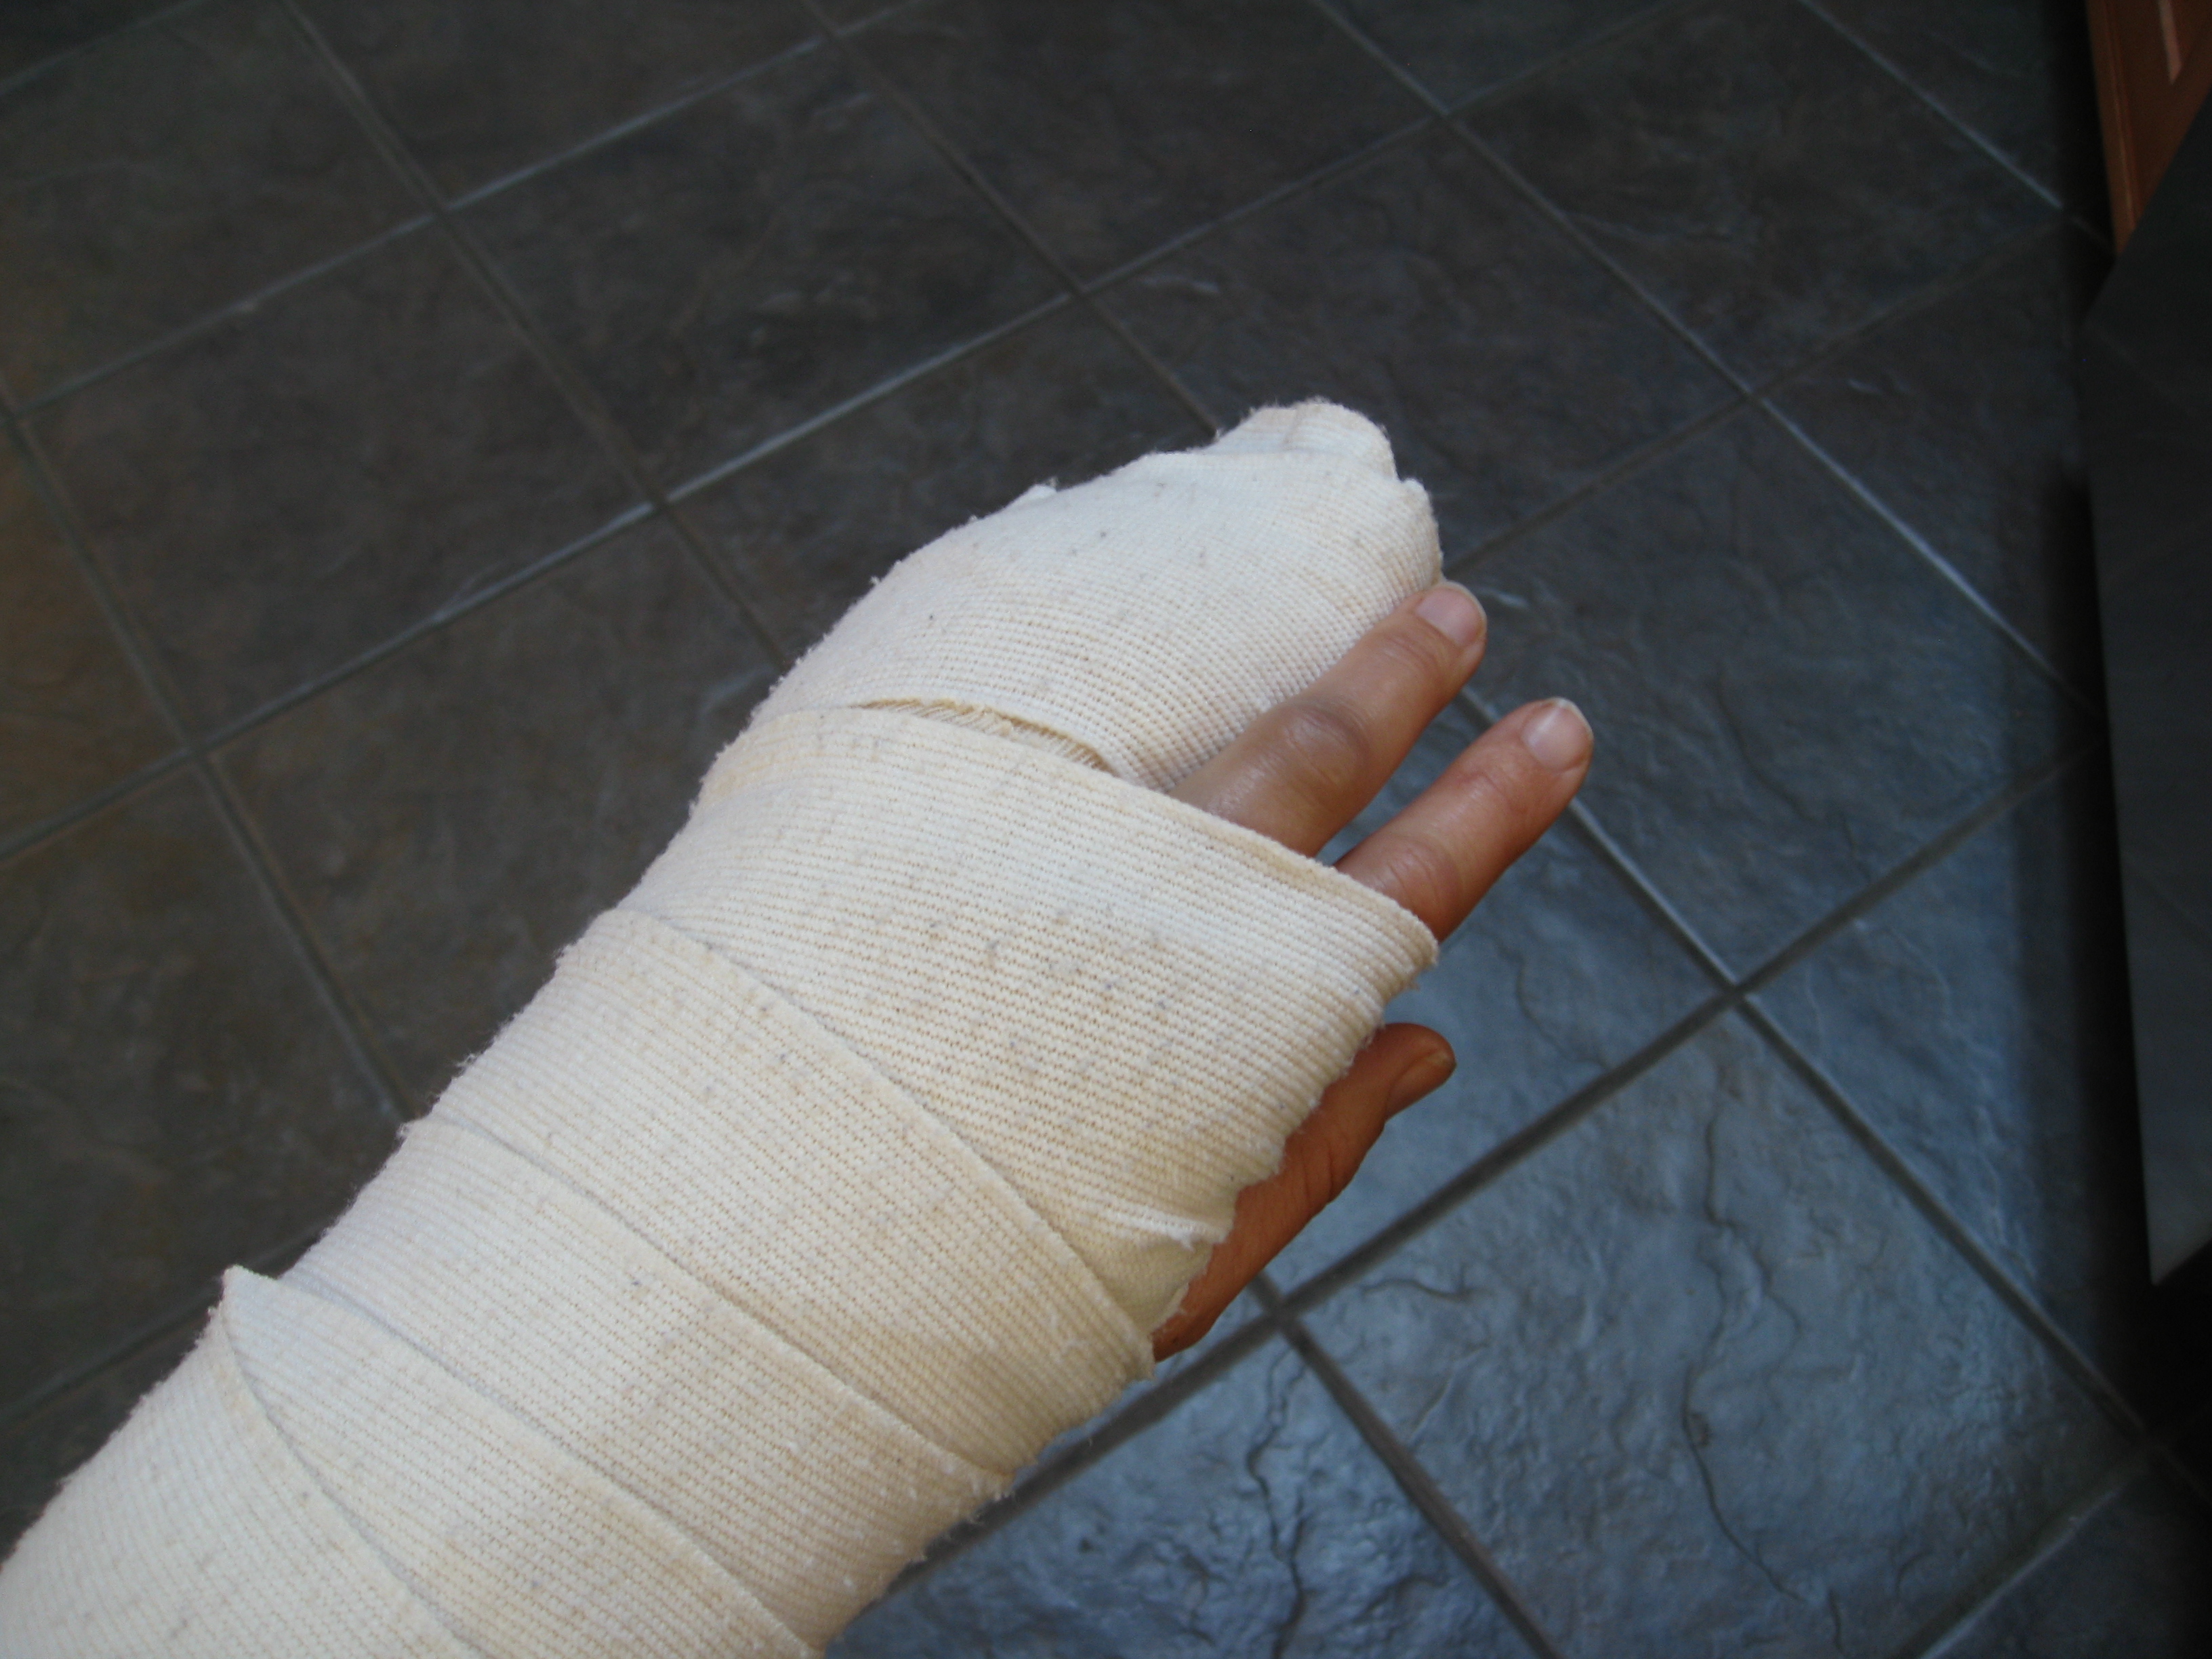 Is gardening still possible with an injured hand?